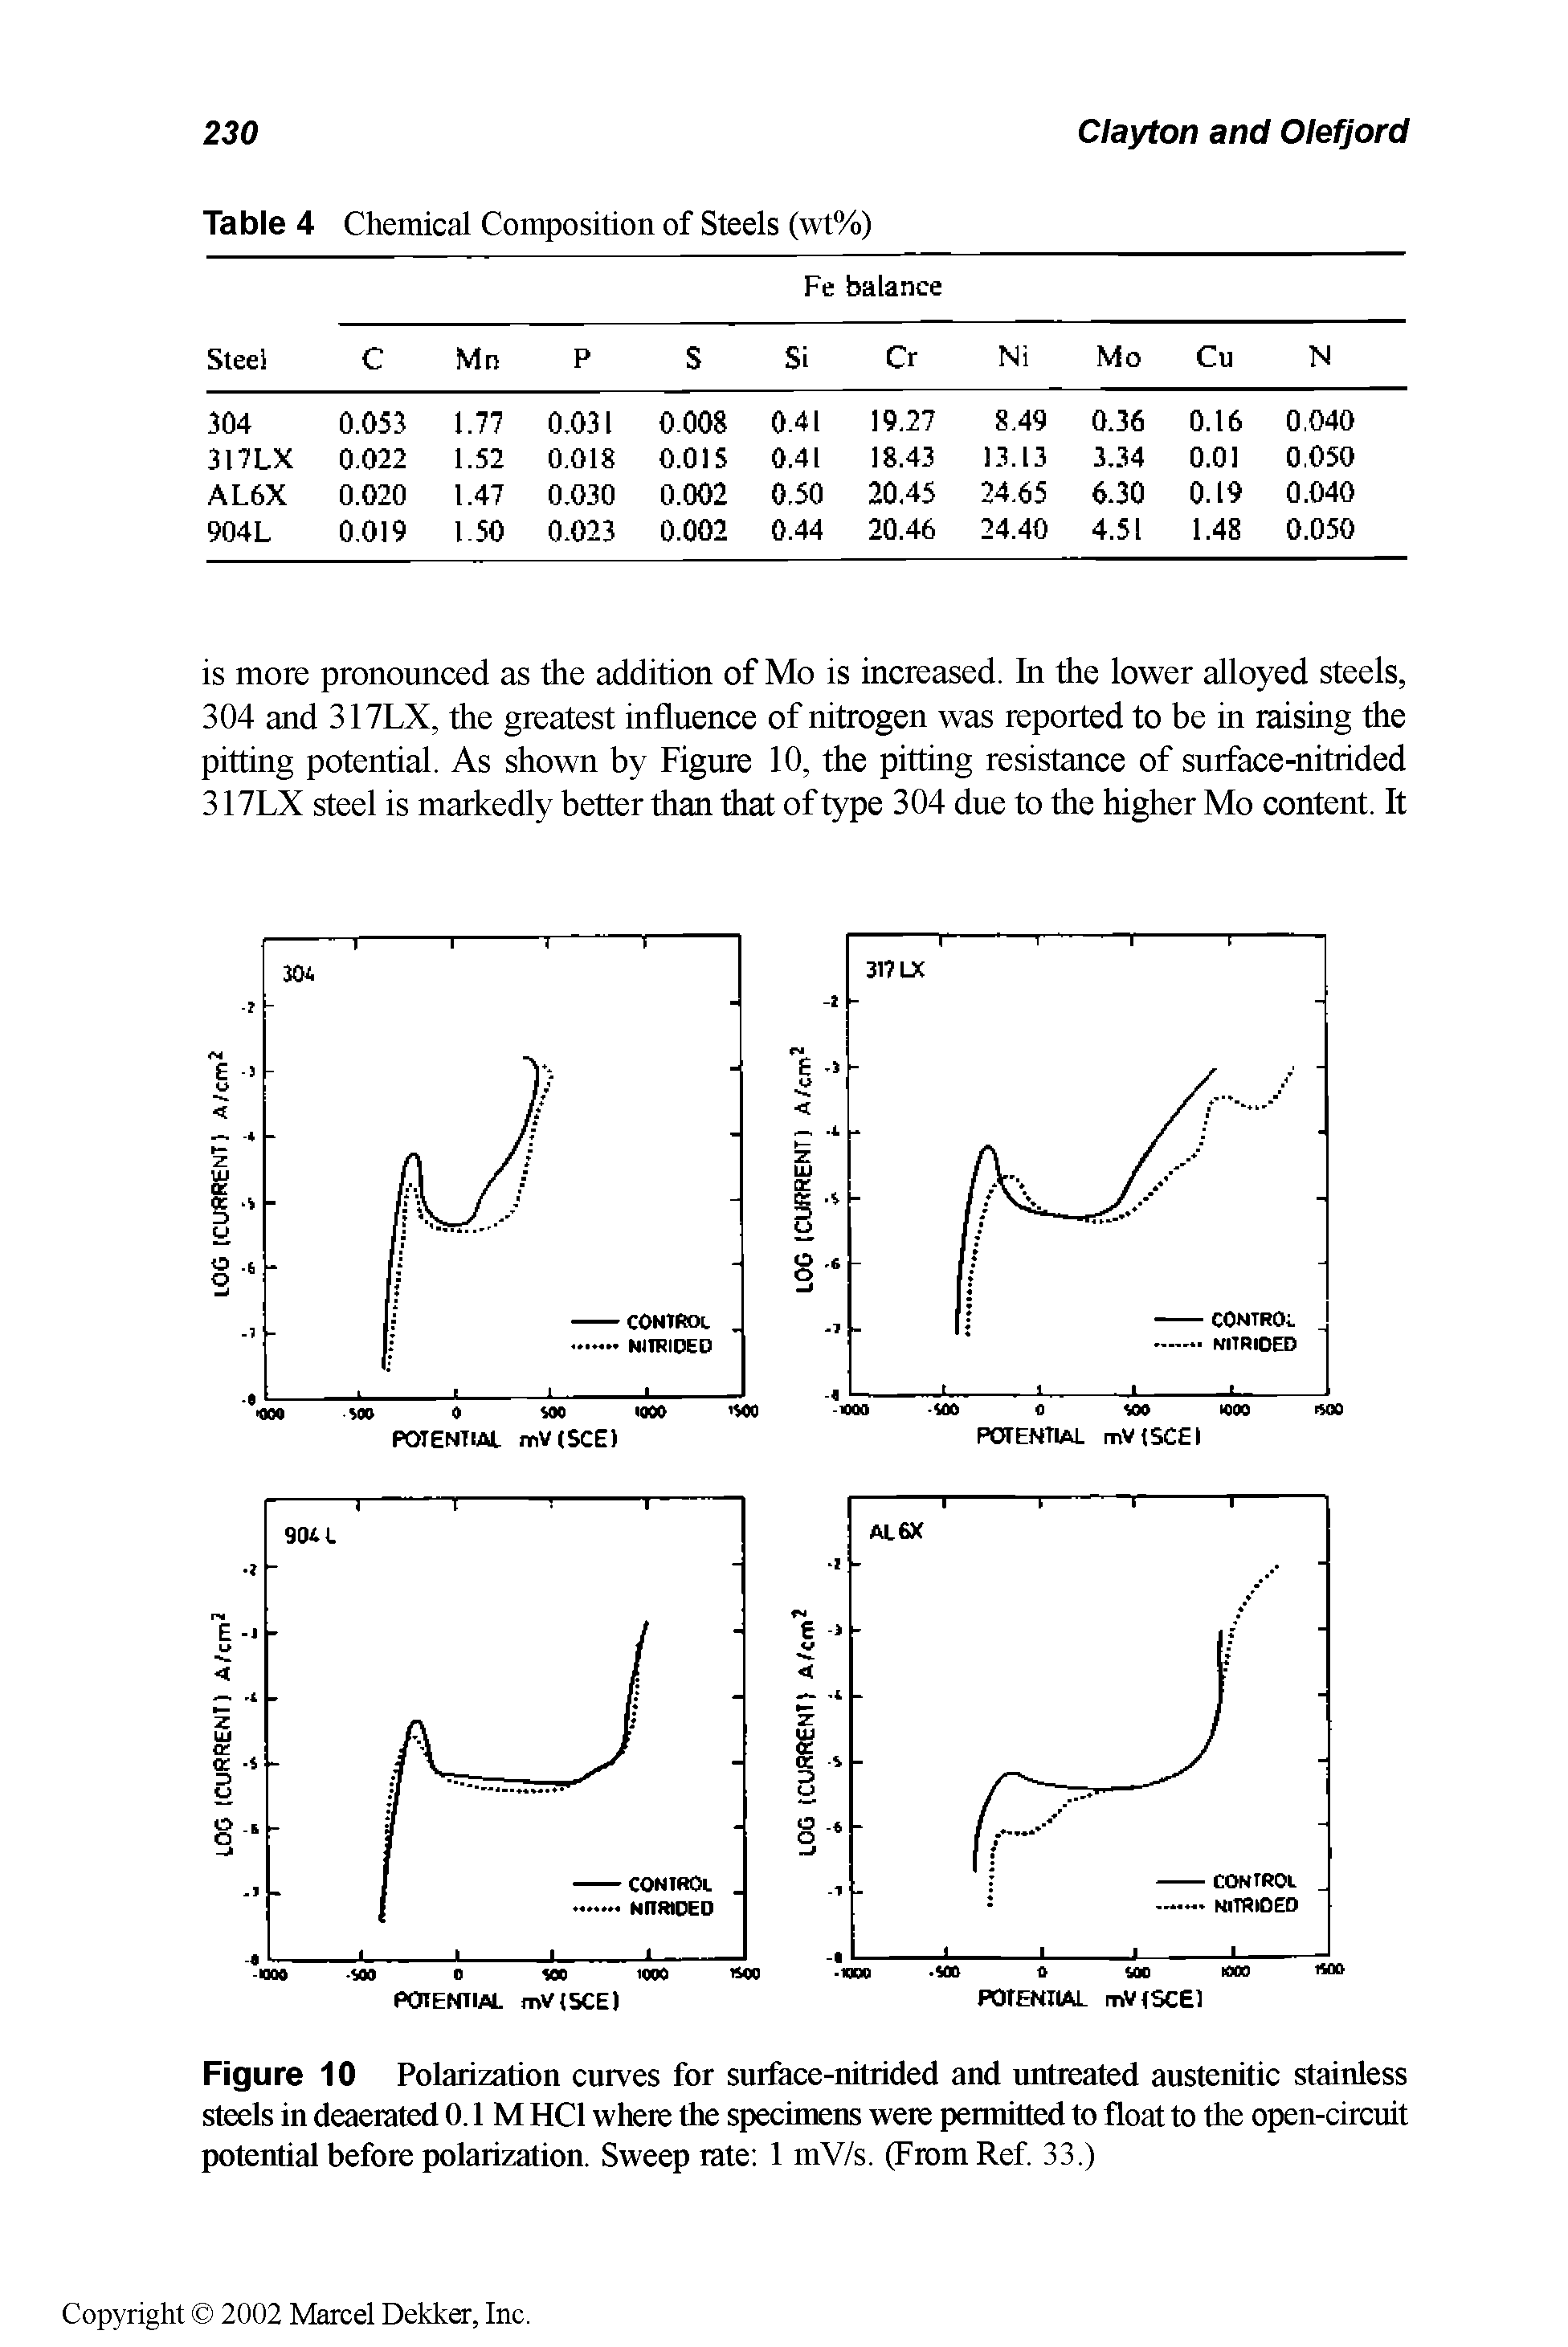 Figure 10 Polarization curves for surface-nitrided and untreated austenitic stainless steels in deaerated 0.1 M HCl where the specimens were permitted to float to the open-circuit potential before polarization. Sweep rate 1 mV/s. (From Ref. 33.)...